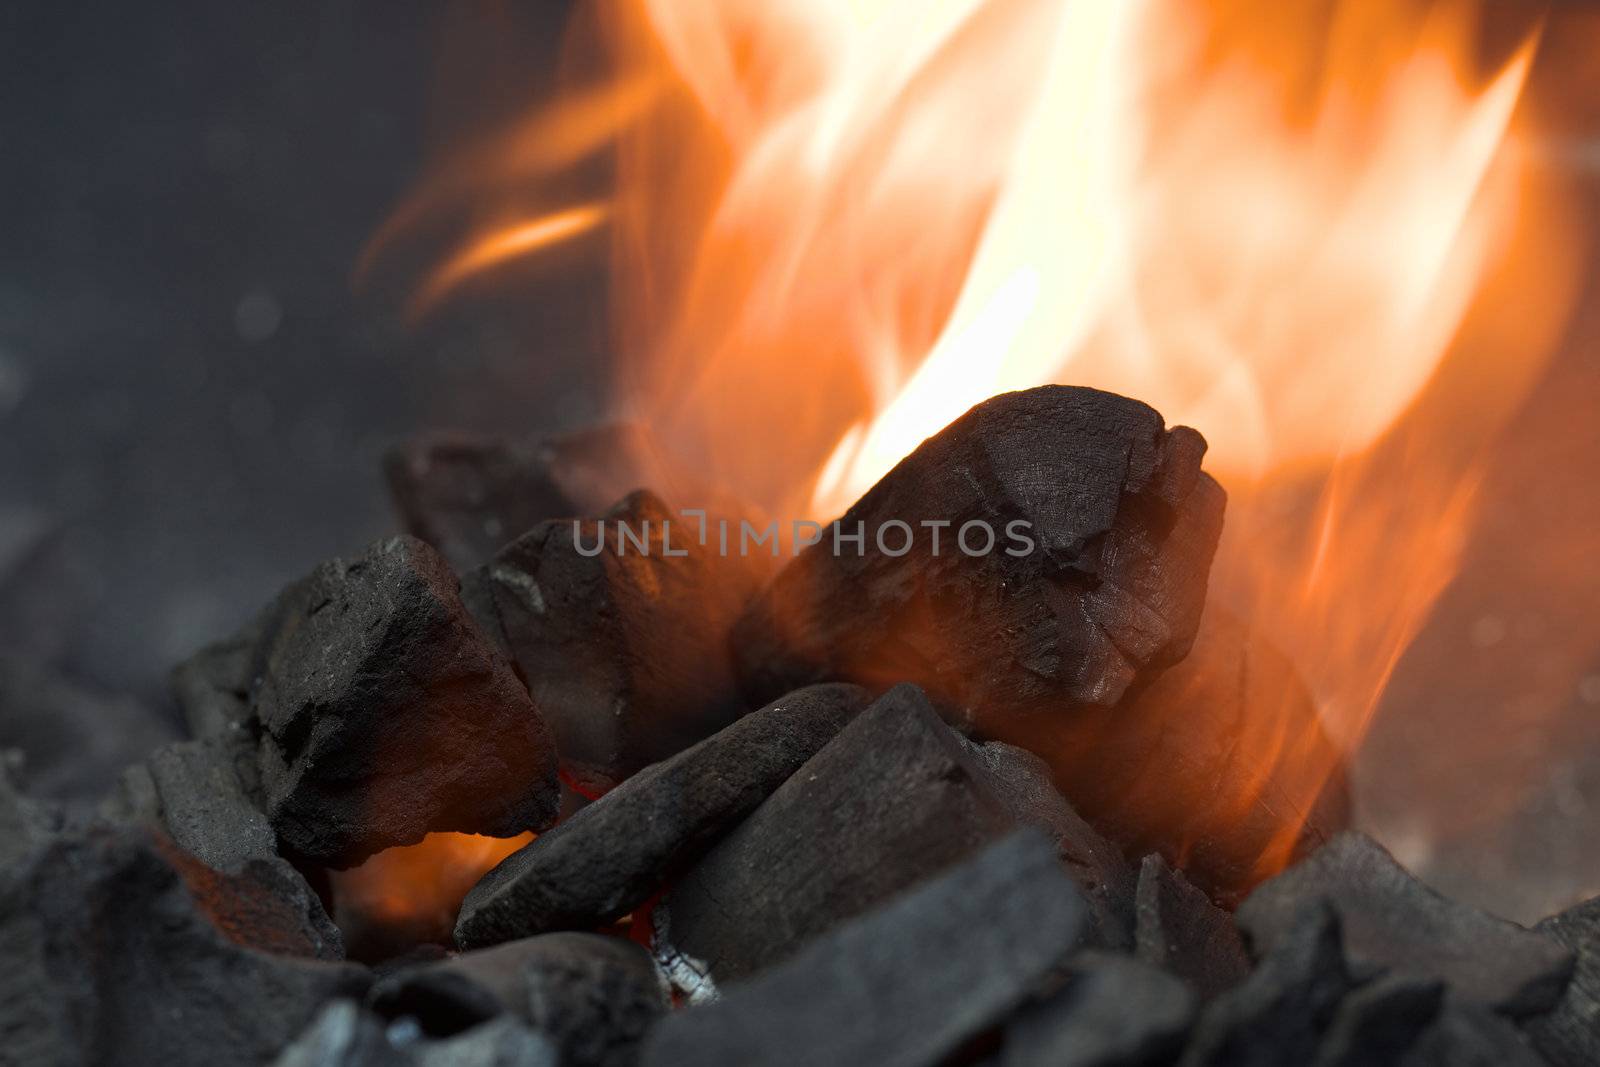 Burning charcoal with orange-colored flame and smoke (Selective Focus, Focus on the front of the big charcoal piece in the middle of the flame)